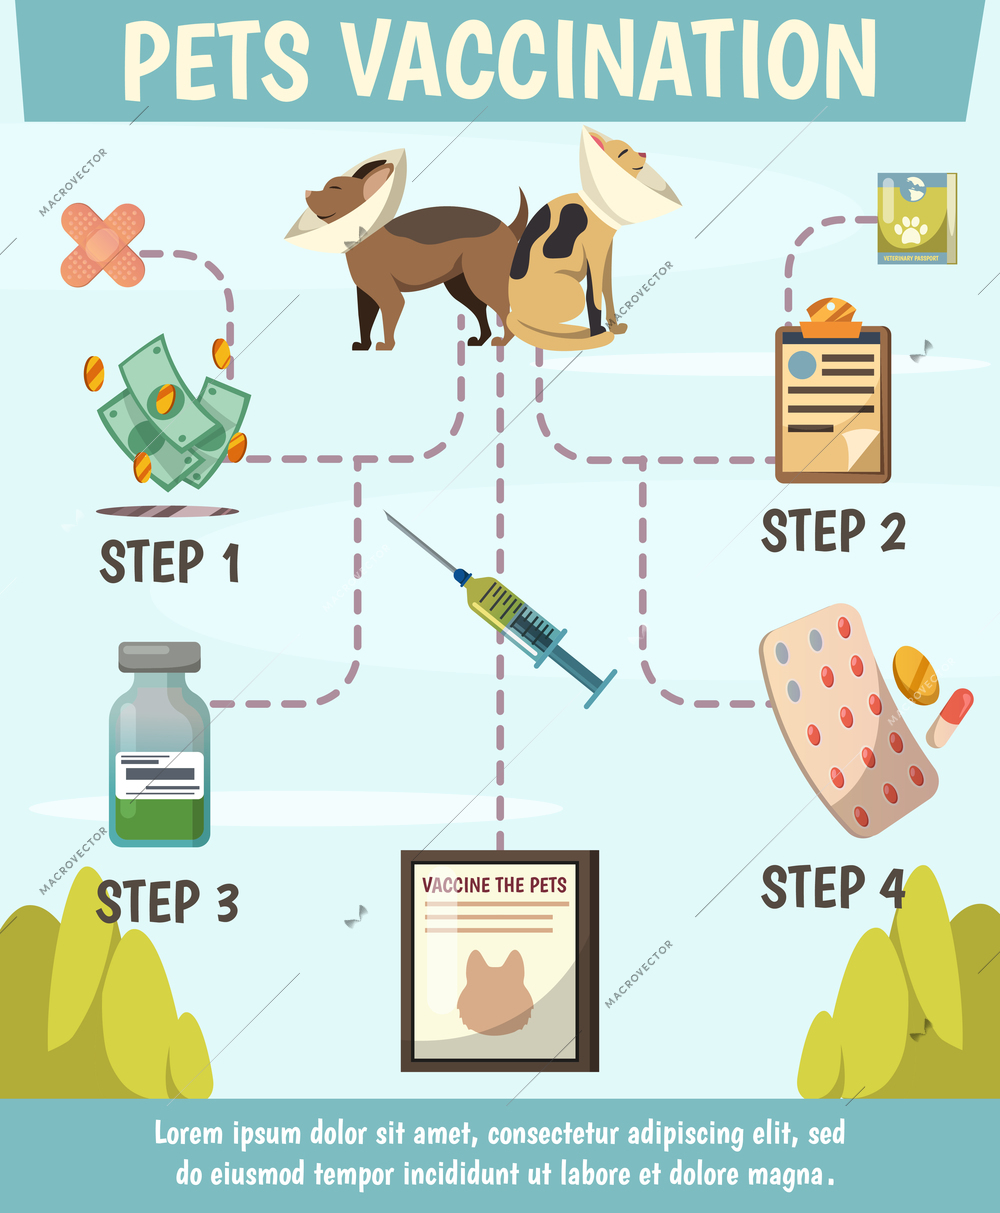 Pets compulsory vaccination orthogonal flowchart poster with 4 steps preventive care for optimal animals protection vector illustration